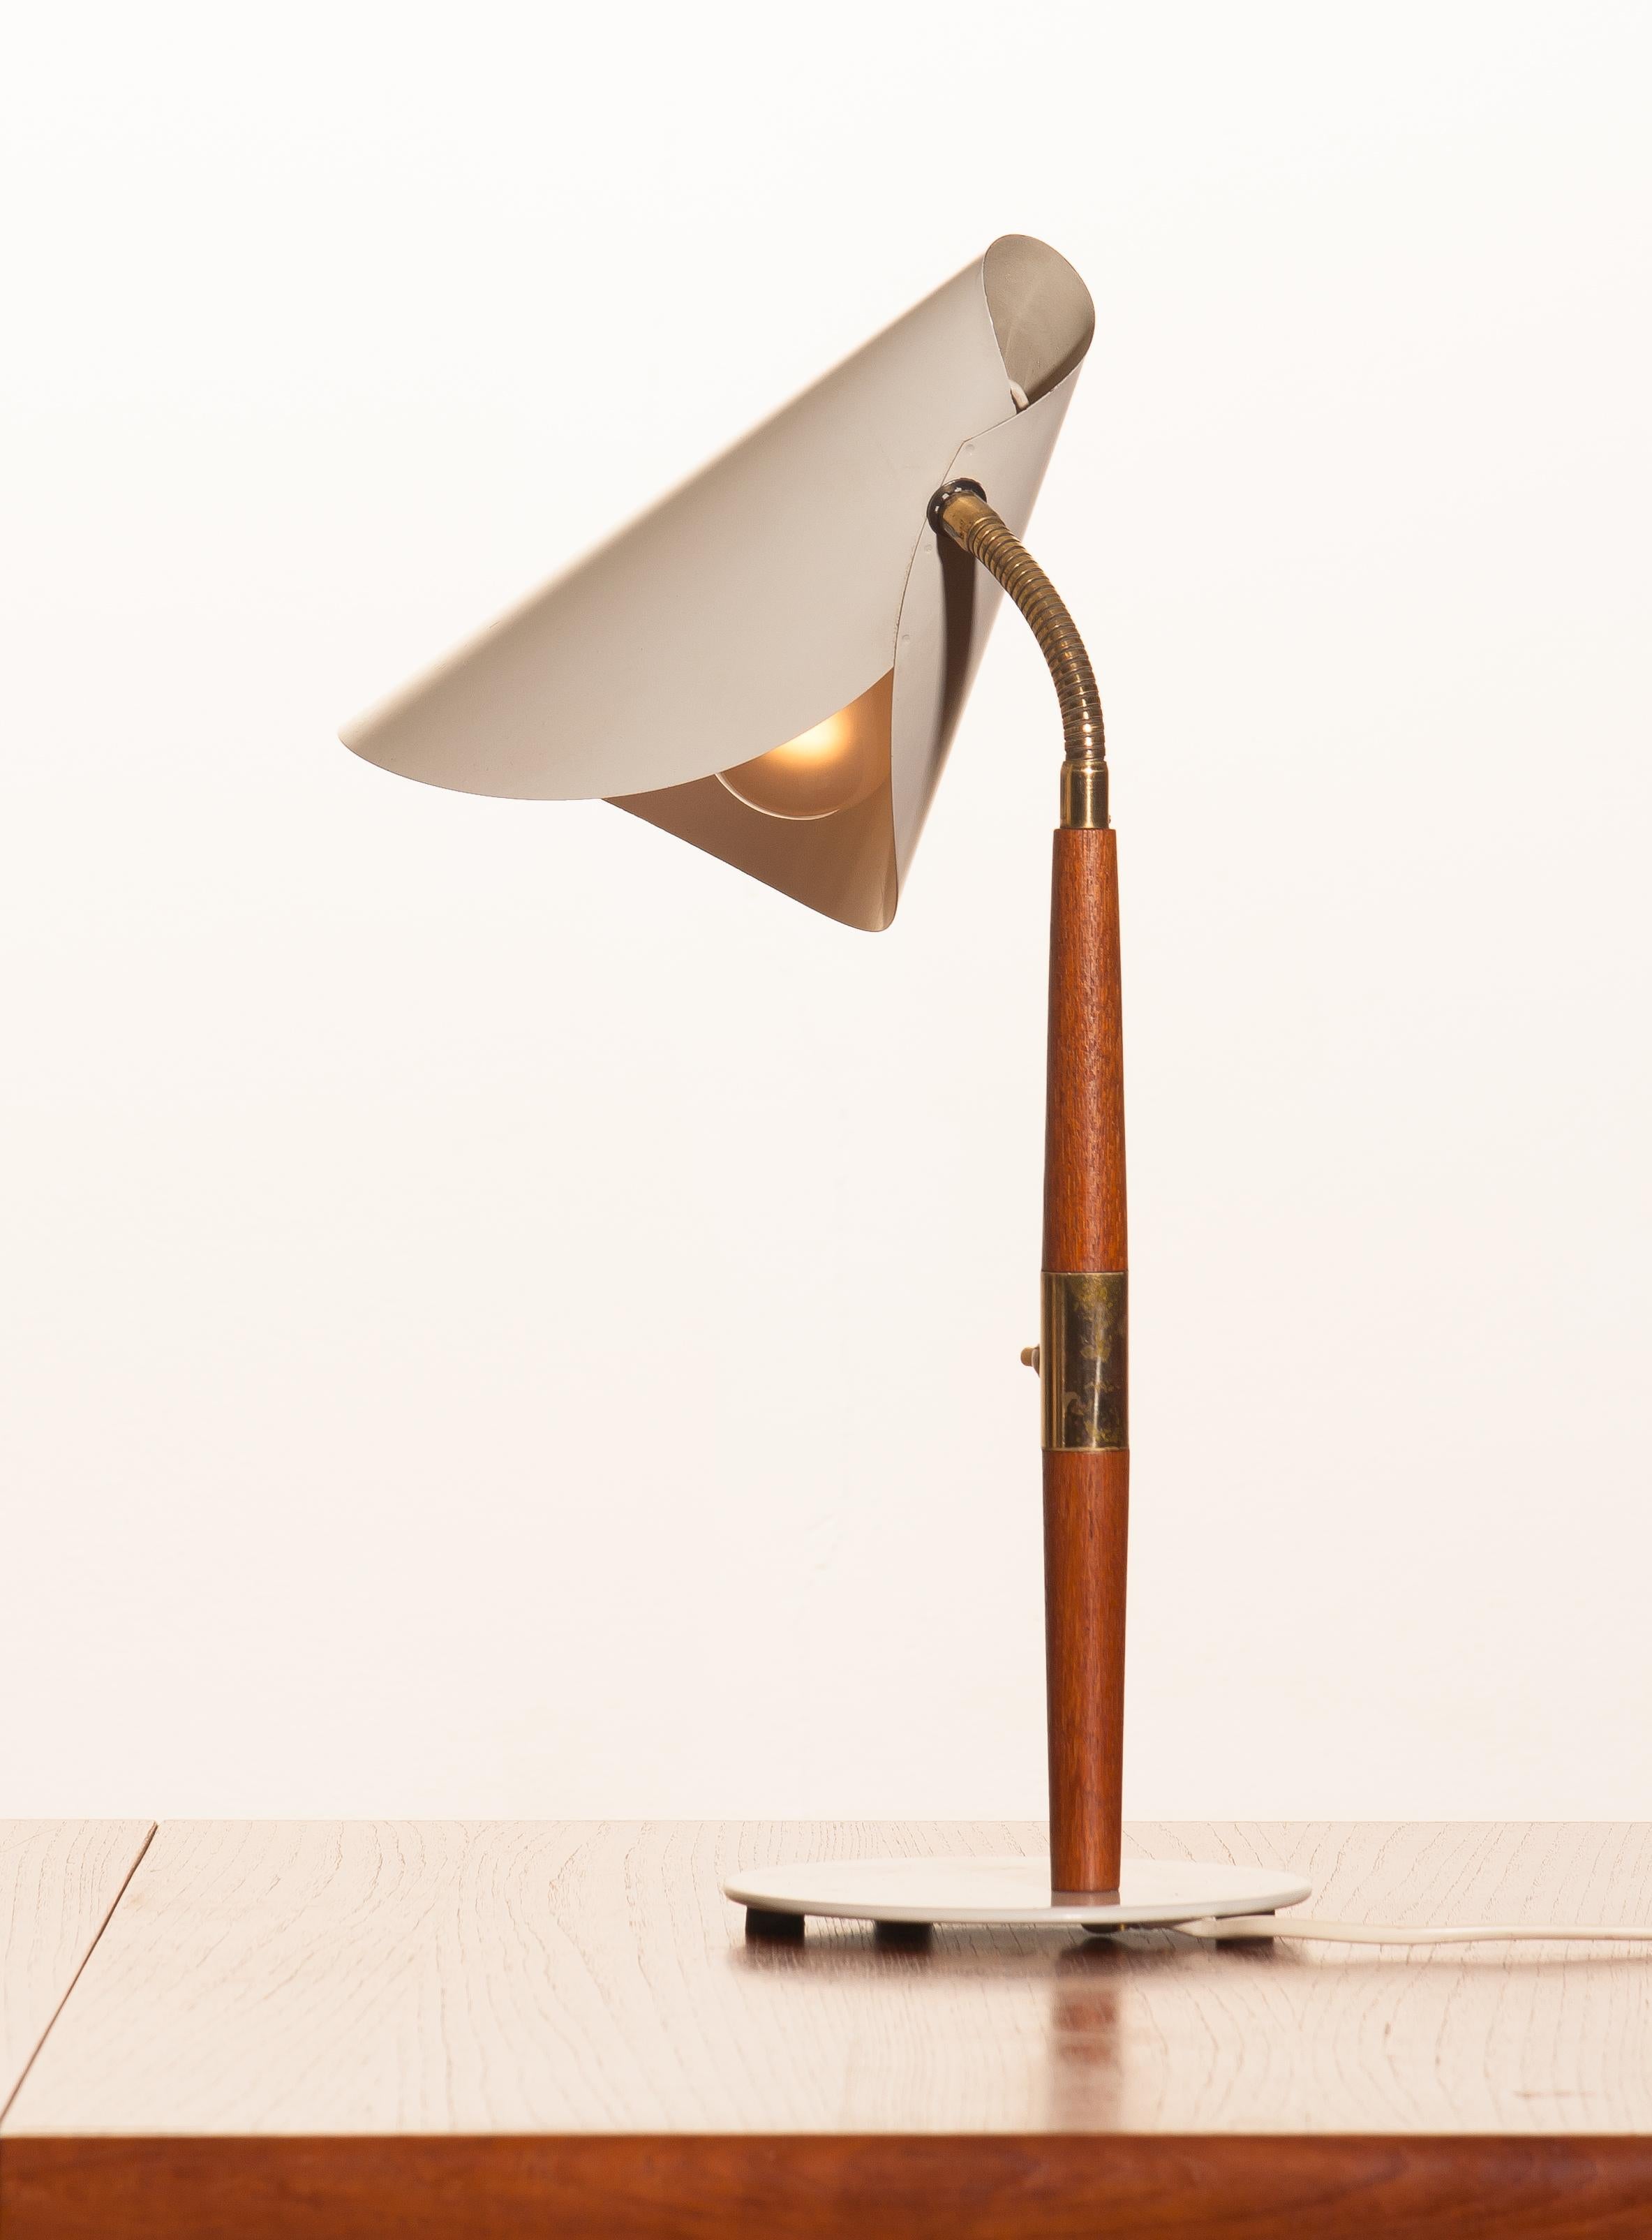 Swedish 1960s, Off White with Teak and Brass Elements Desk or Table Lamp by Karlskrona